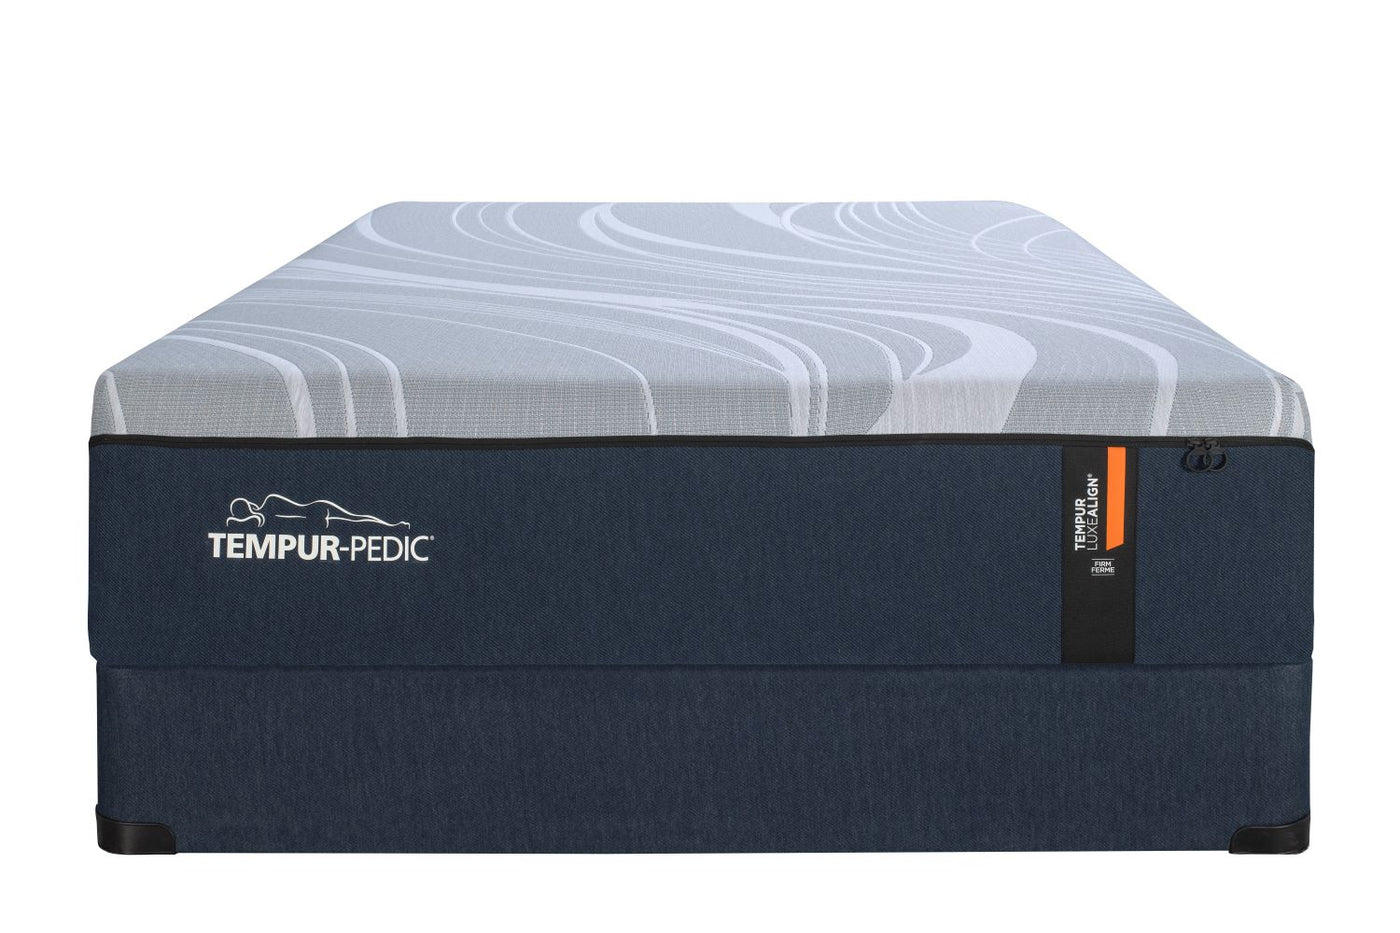 Tempur-Pedic LuxeAlign® 2.0 Firm 13" King Mattress and Boxspring Set